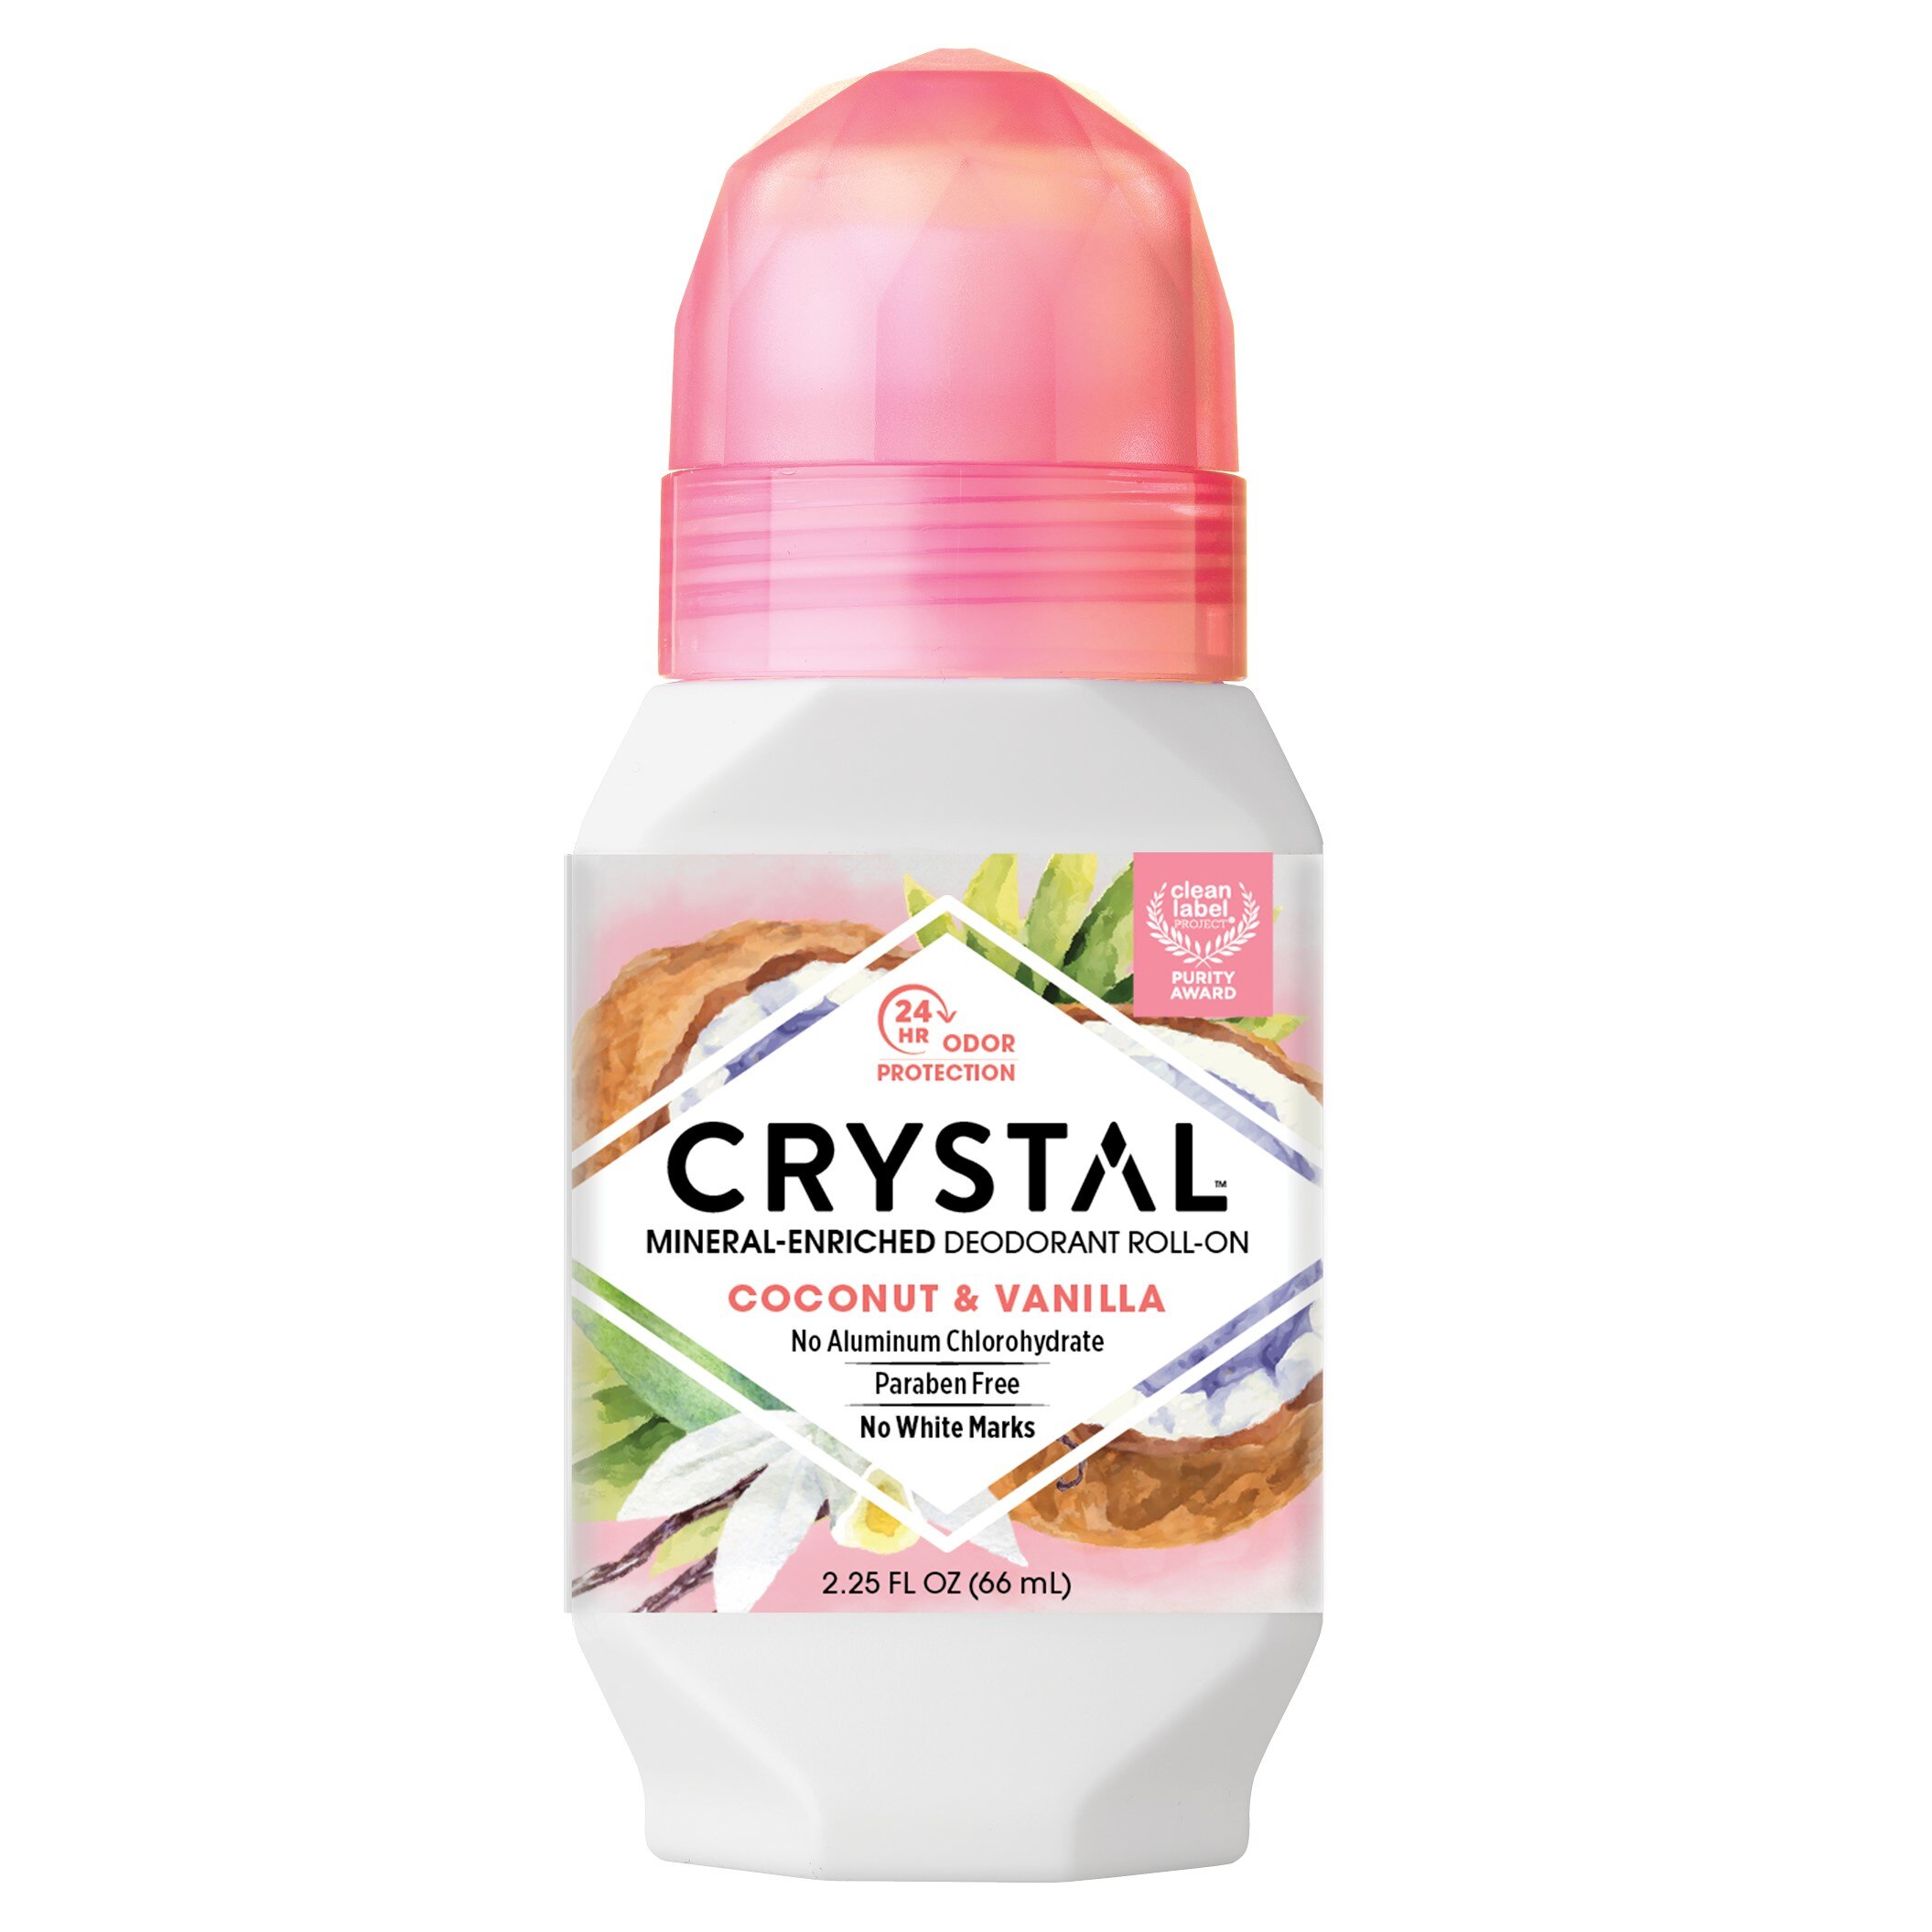 Crystal 24-Hour Mineral-Enriched Roll-on Deodorant, Coconut & Vanilla